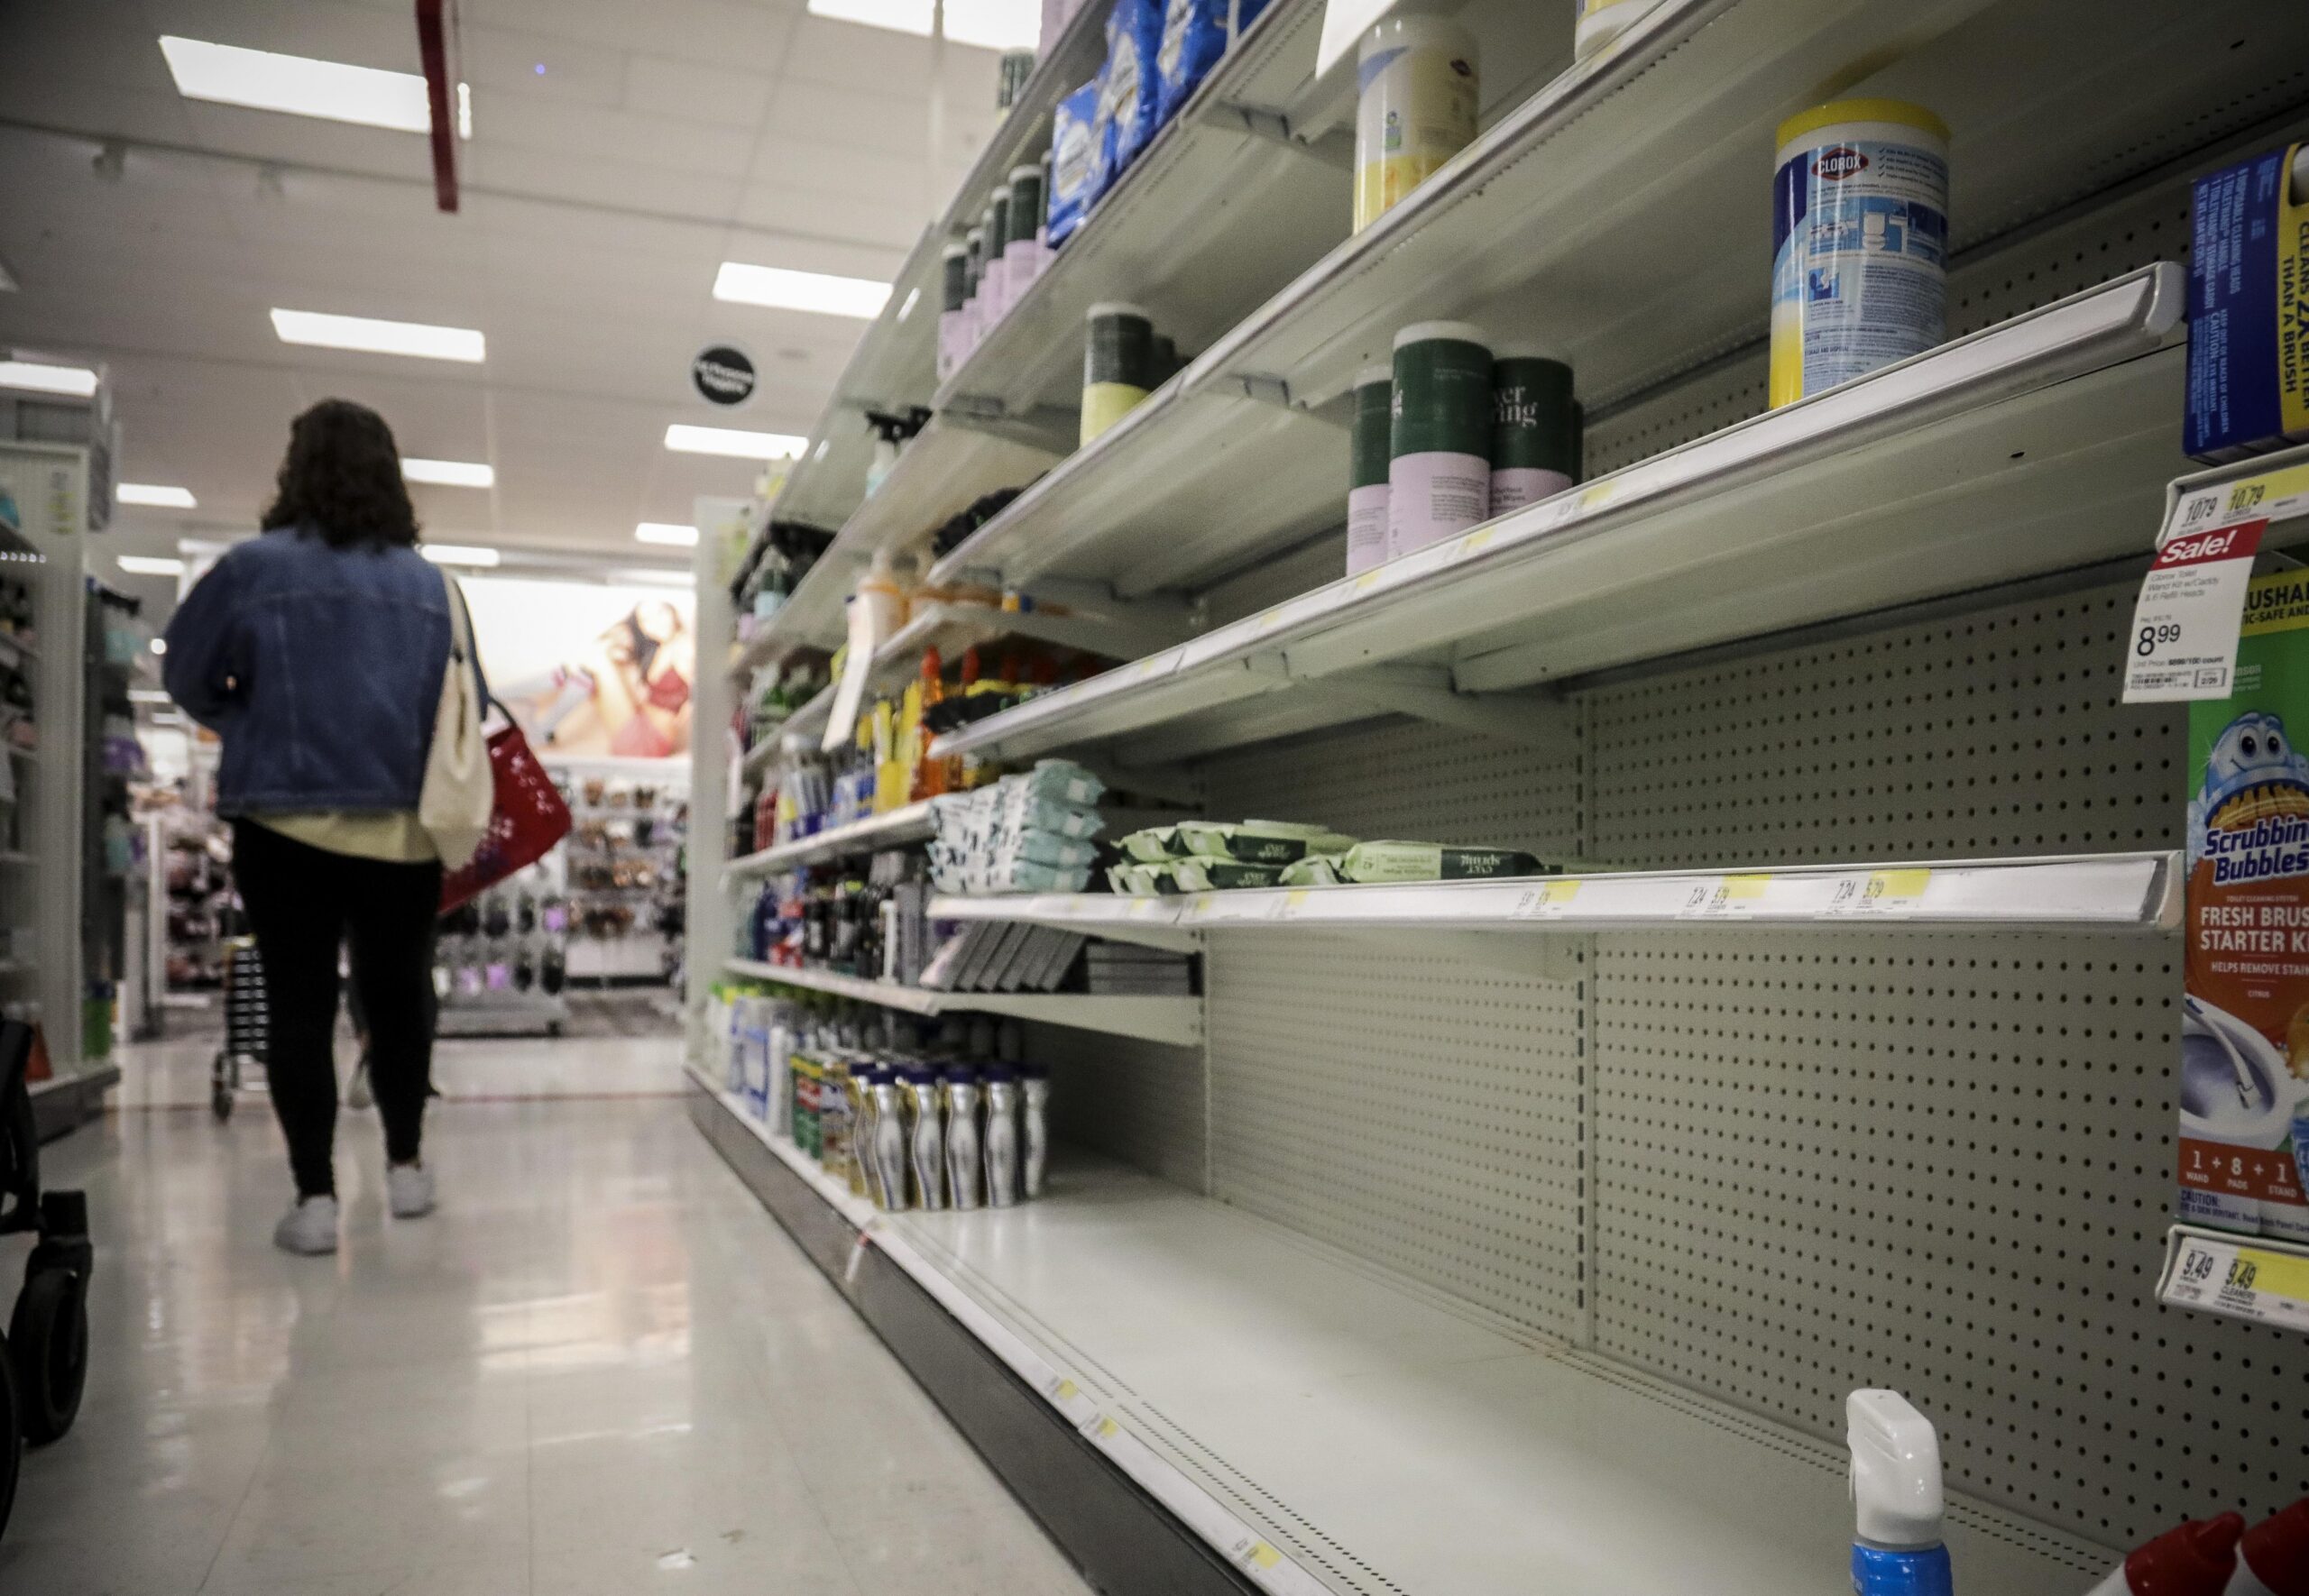 Empty shelves for disinfectant wipes wait for restocking, as concerns grow around COVID-19